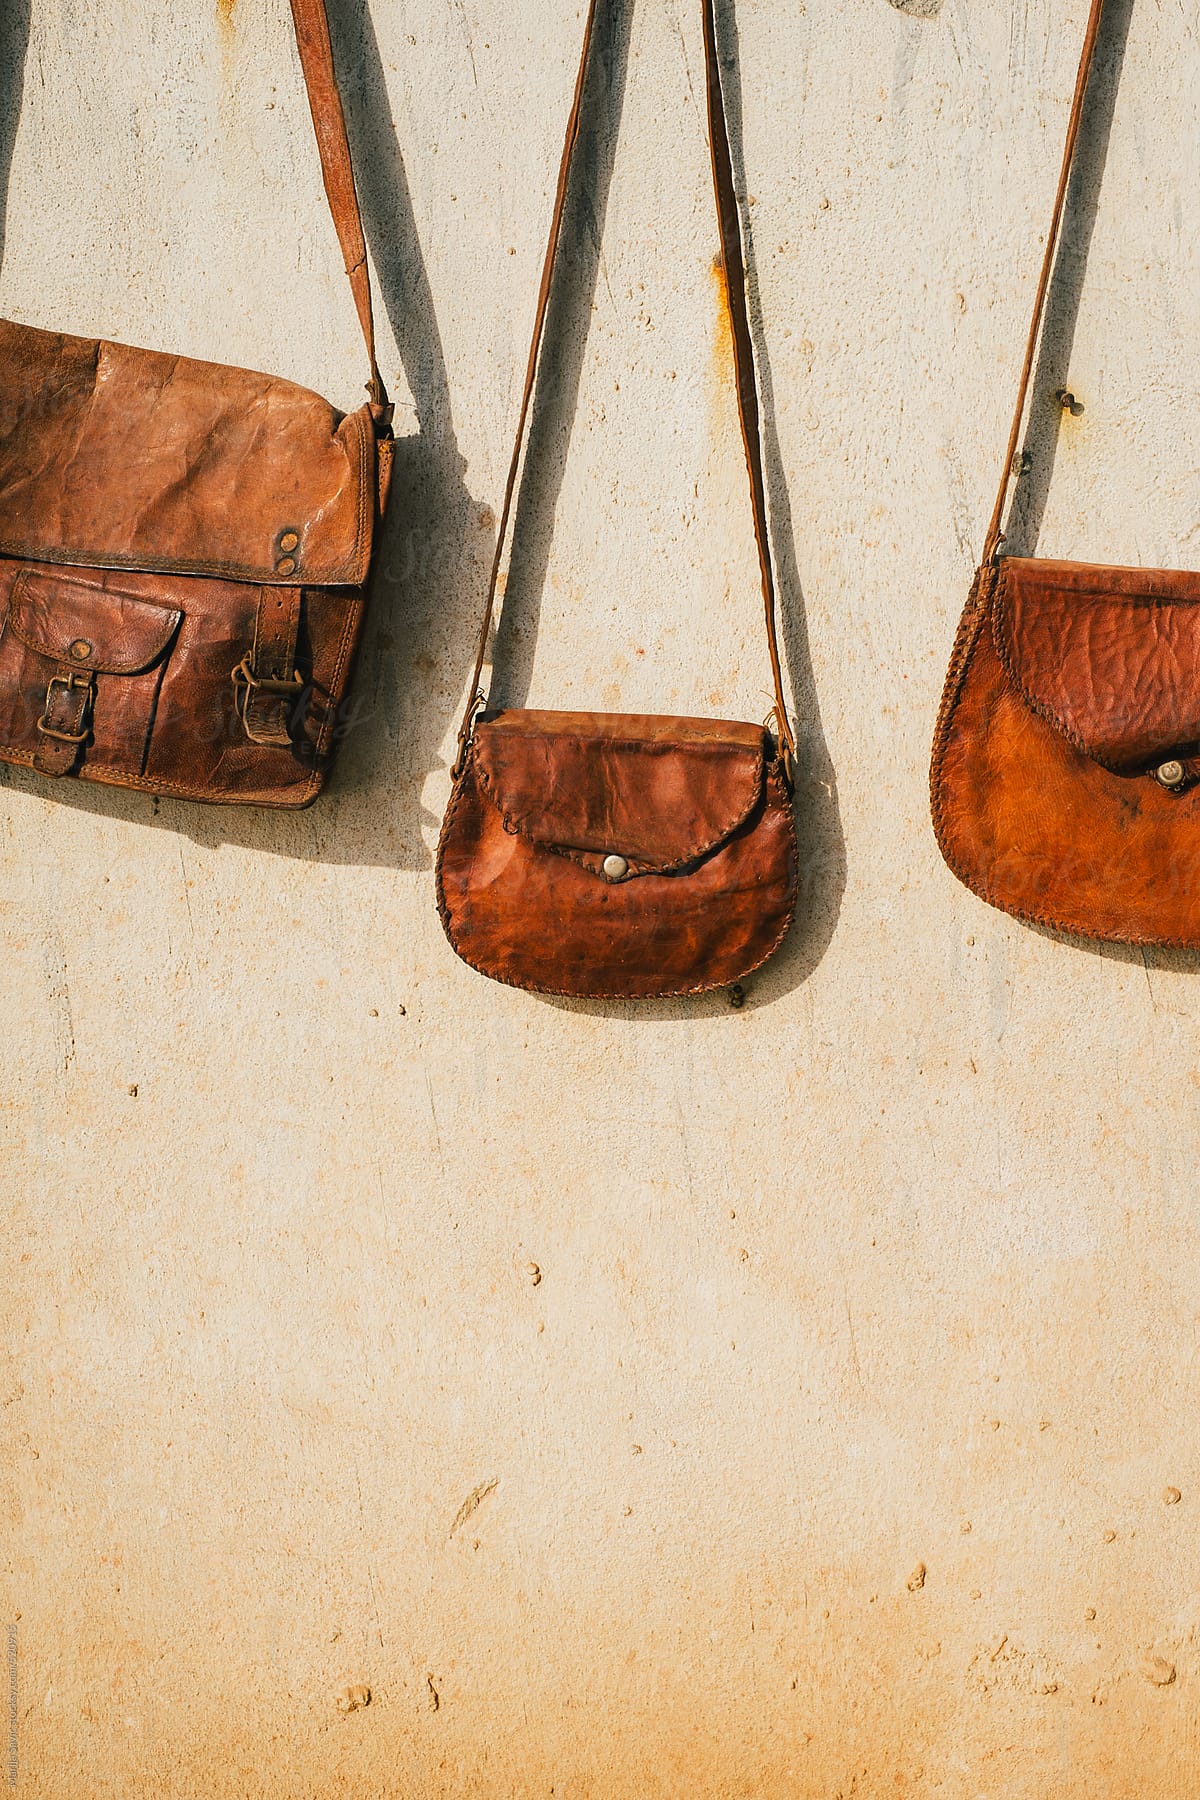 Leather Bags Hanging on the Wall